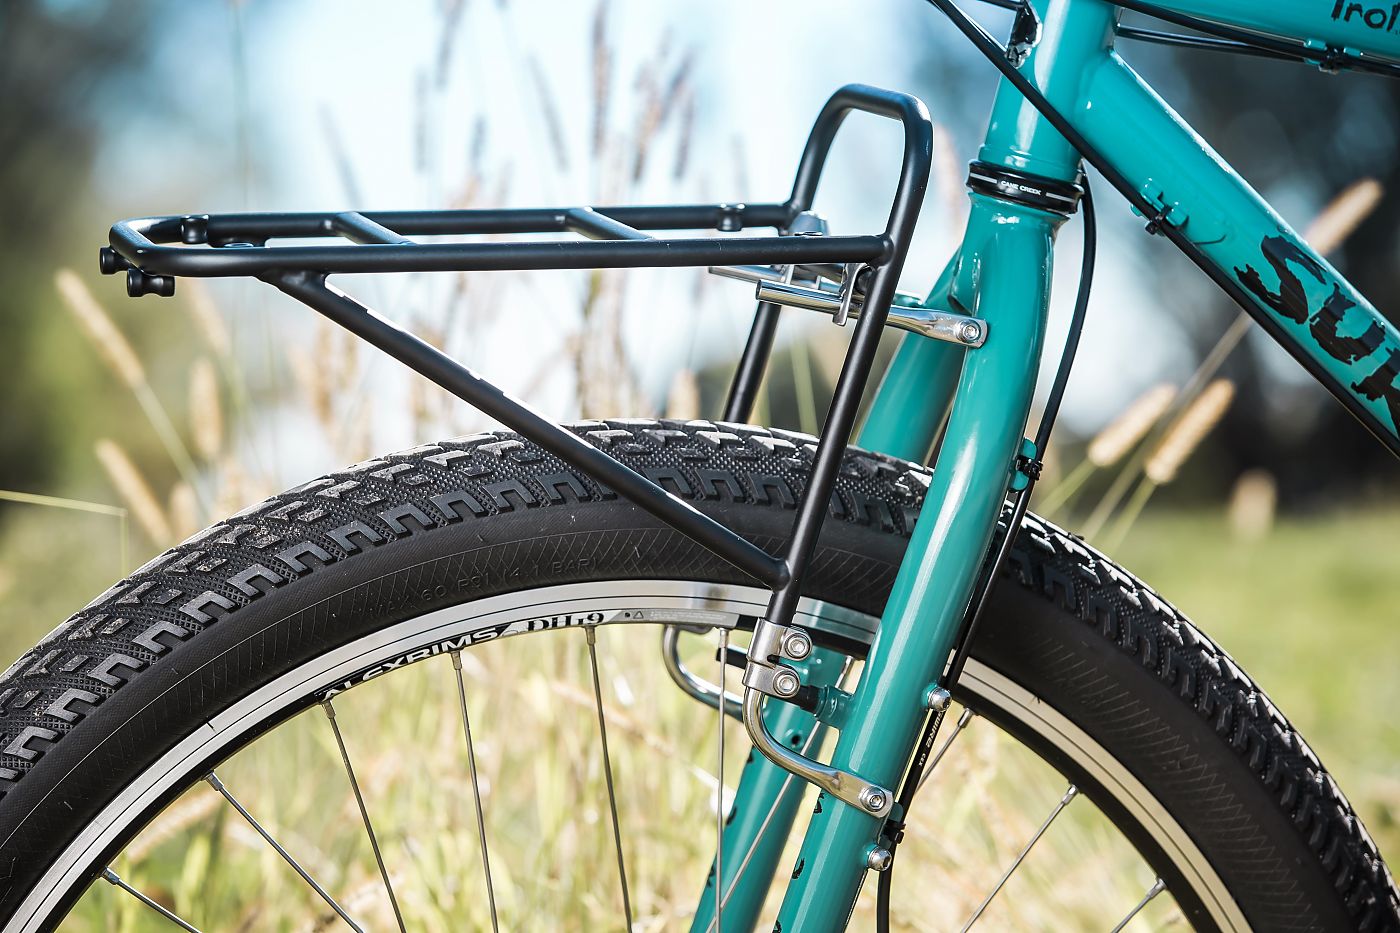 Surly announces new front racks and touring tire at Biketoberfest